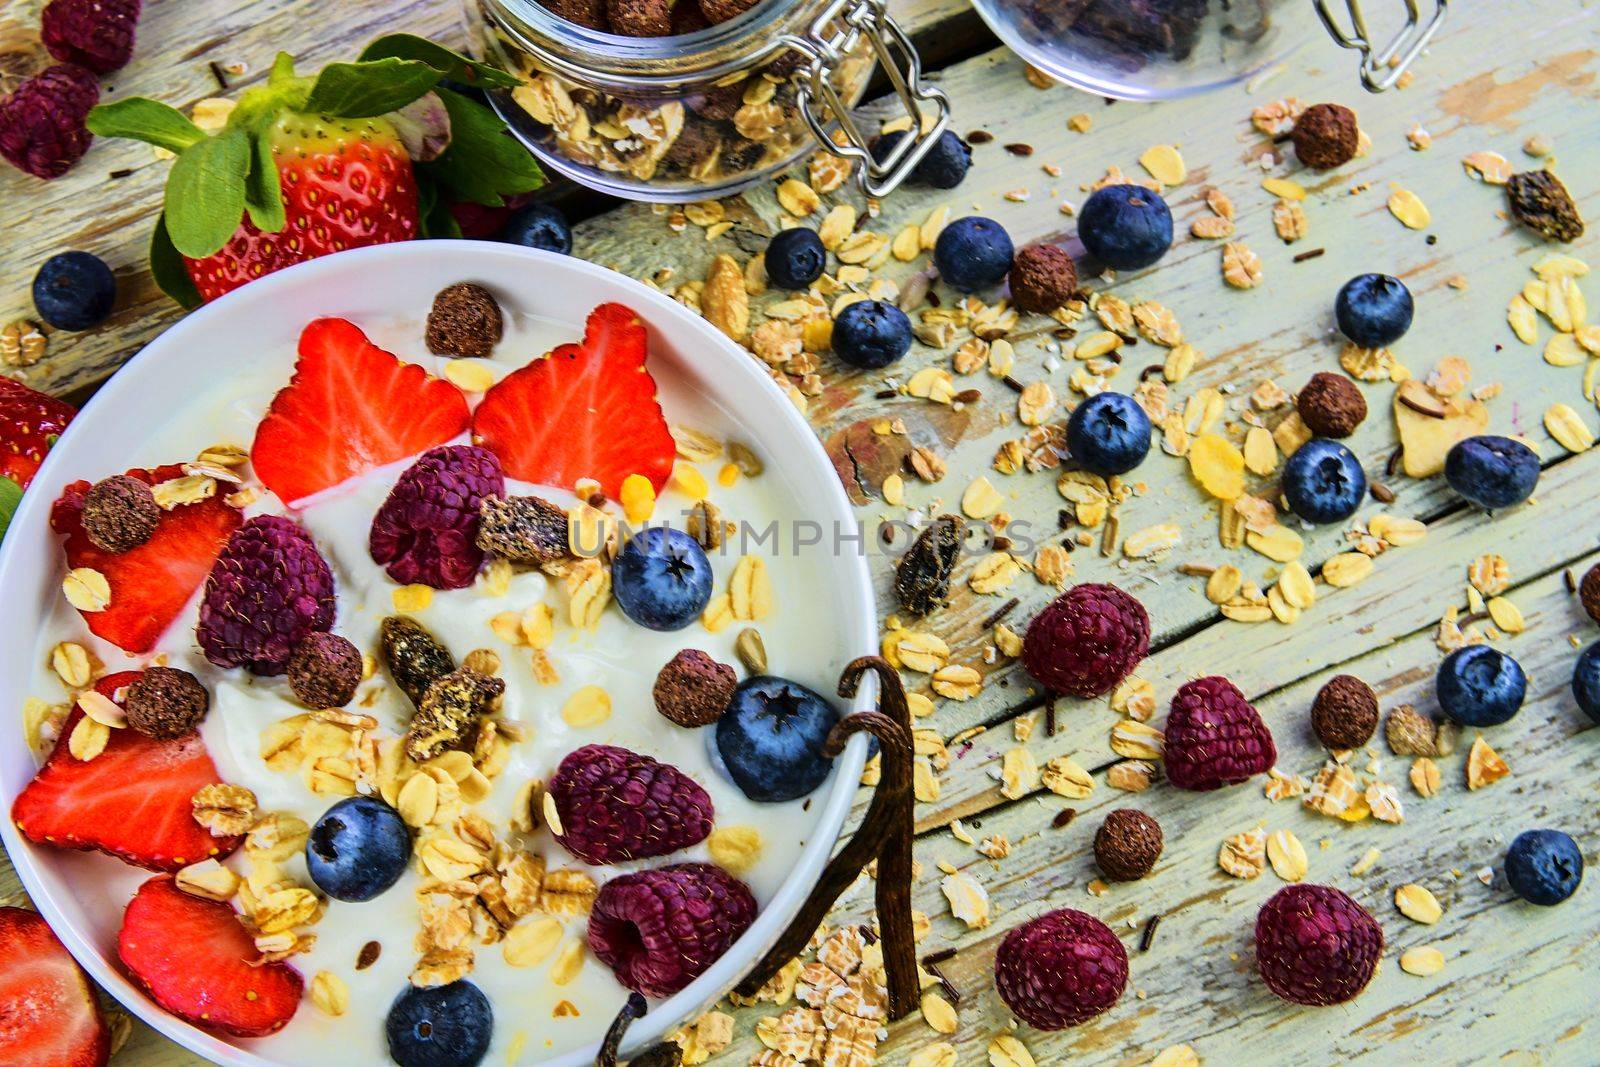 Healthy breakfast, cereal with yoghurt, strawberries, blueberries, raspberries and muesli on wooden rustic background.  Concept of: fitness, diet, wellness and breakfasts.